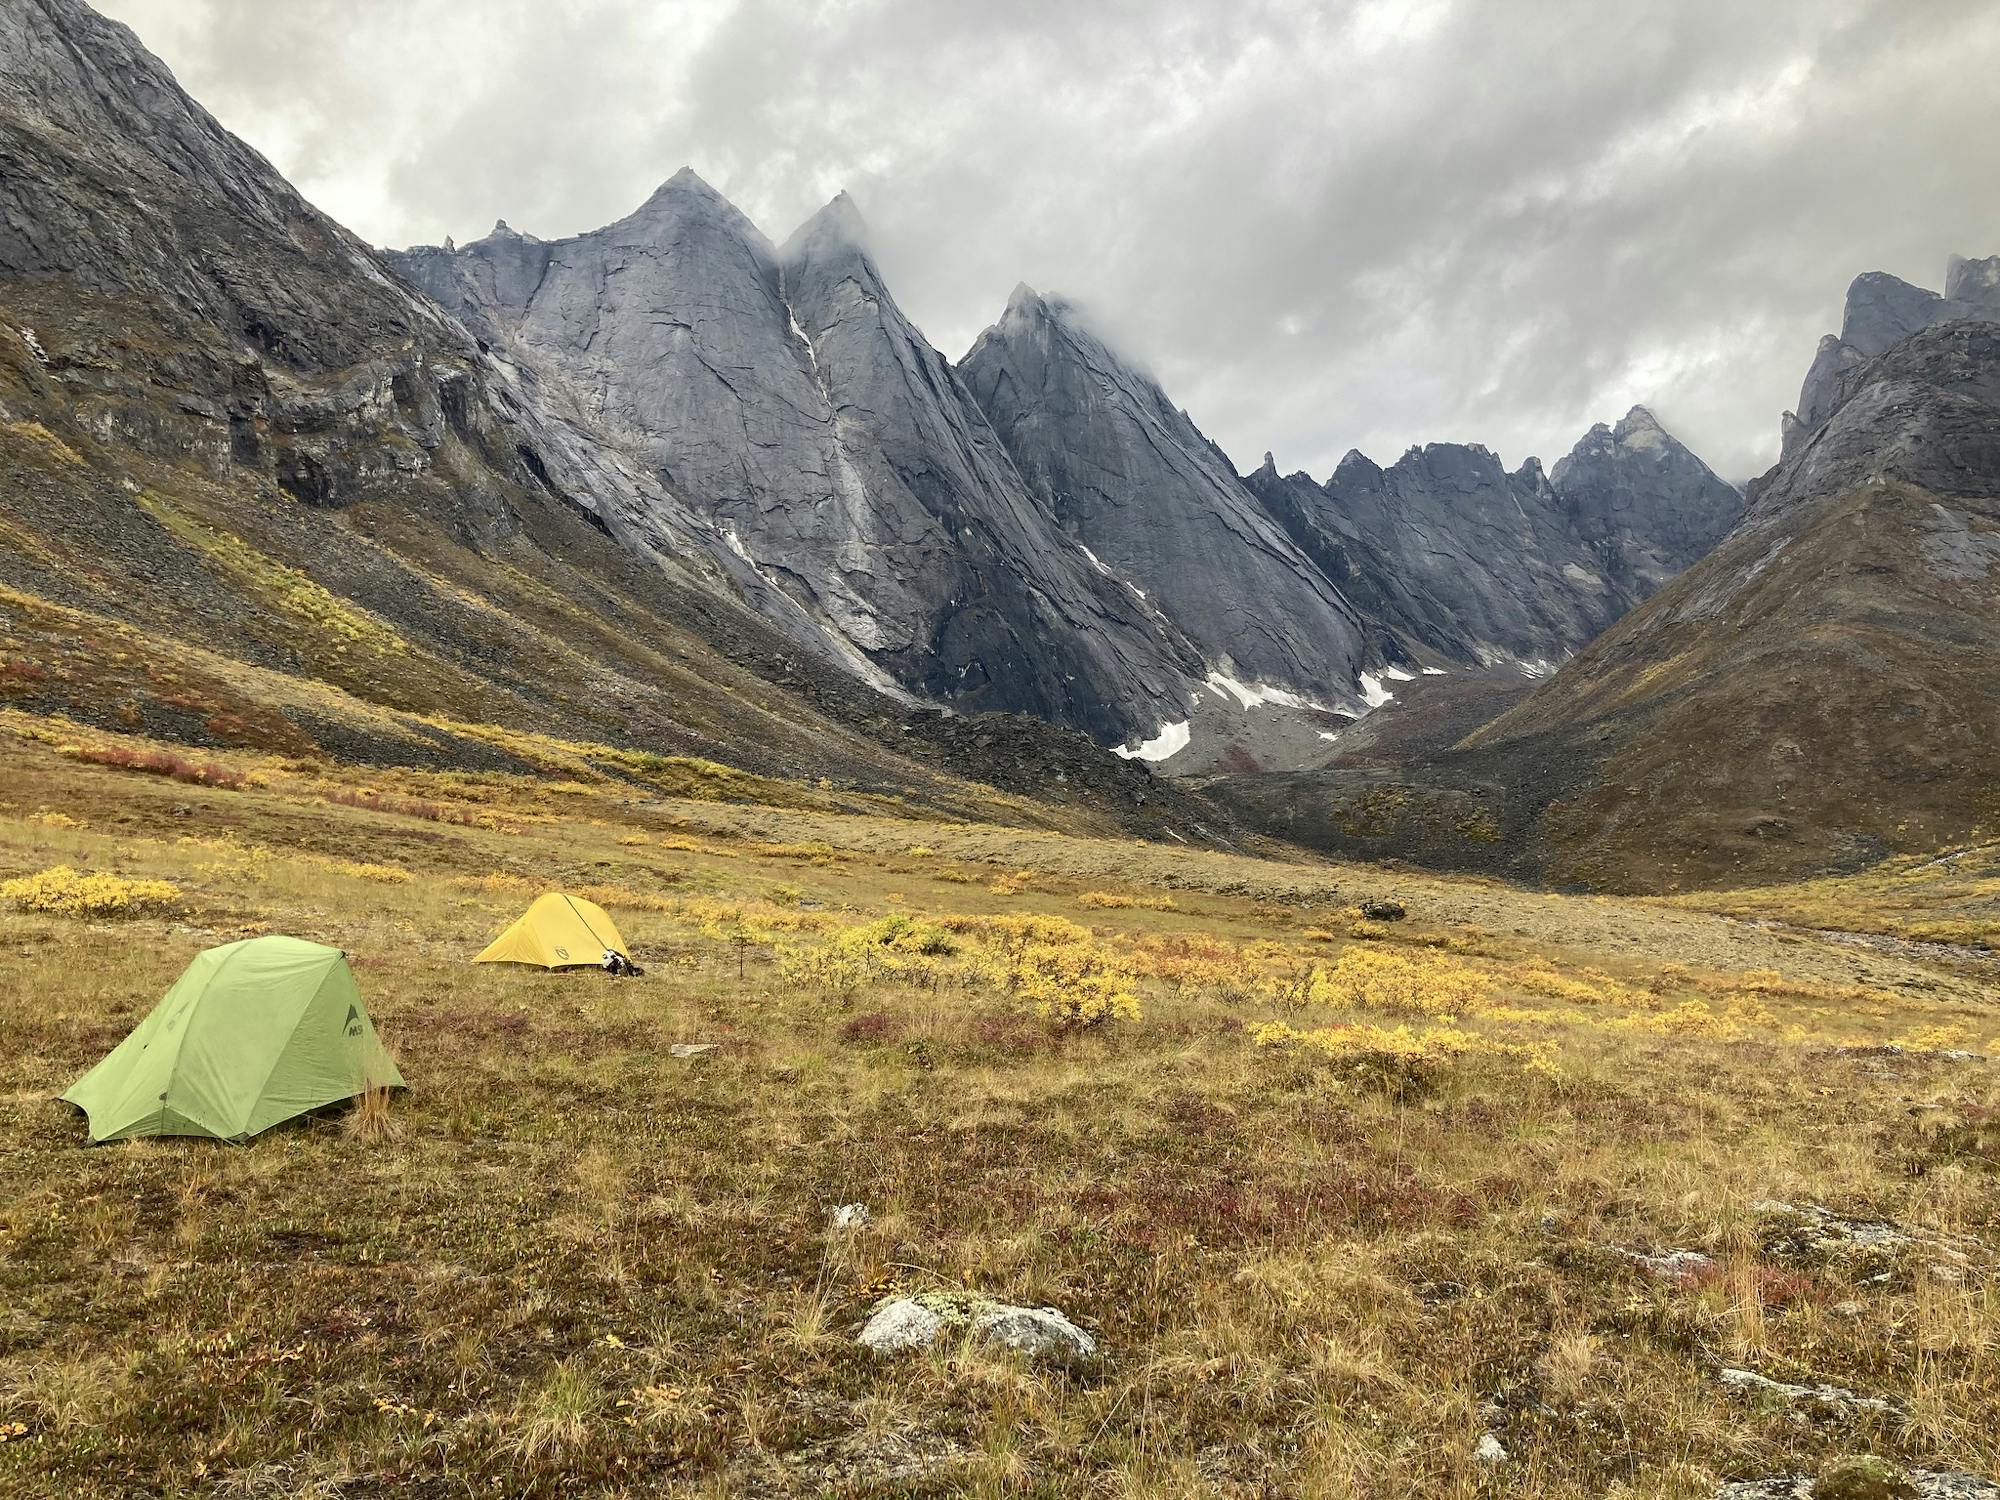 Tents near Arrigetch Creek at the mouth of Aquarius Valley